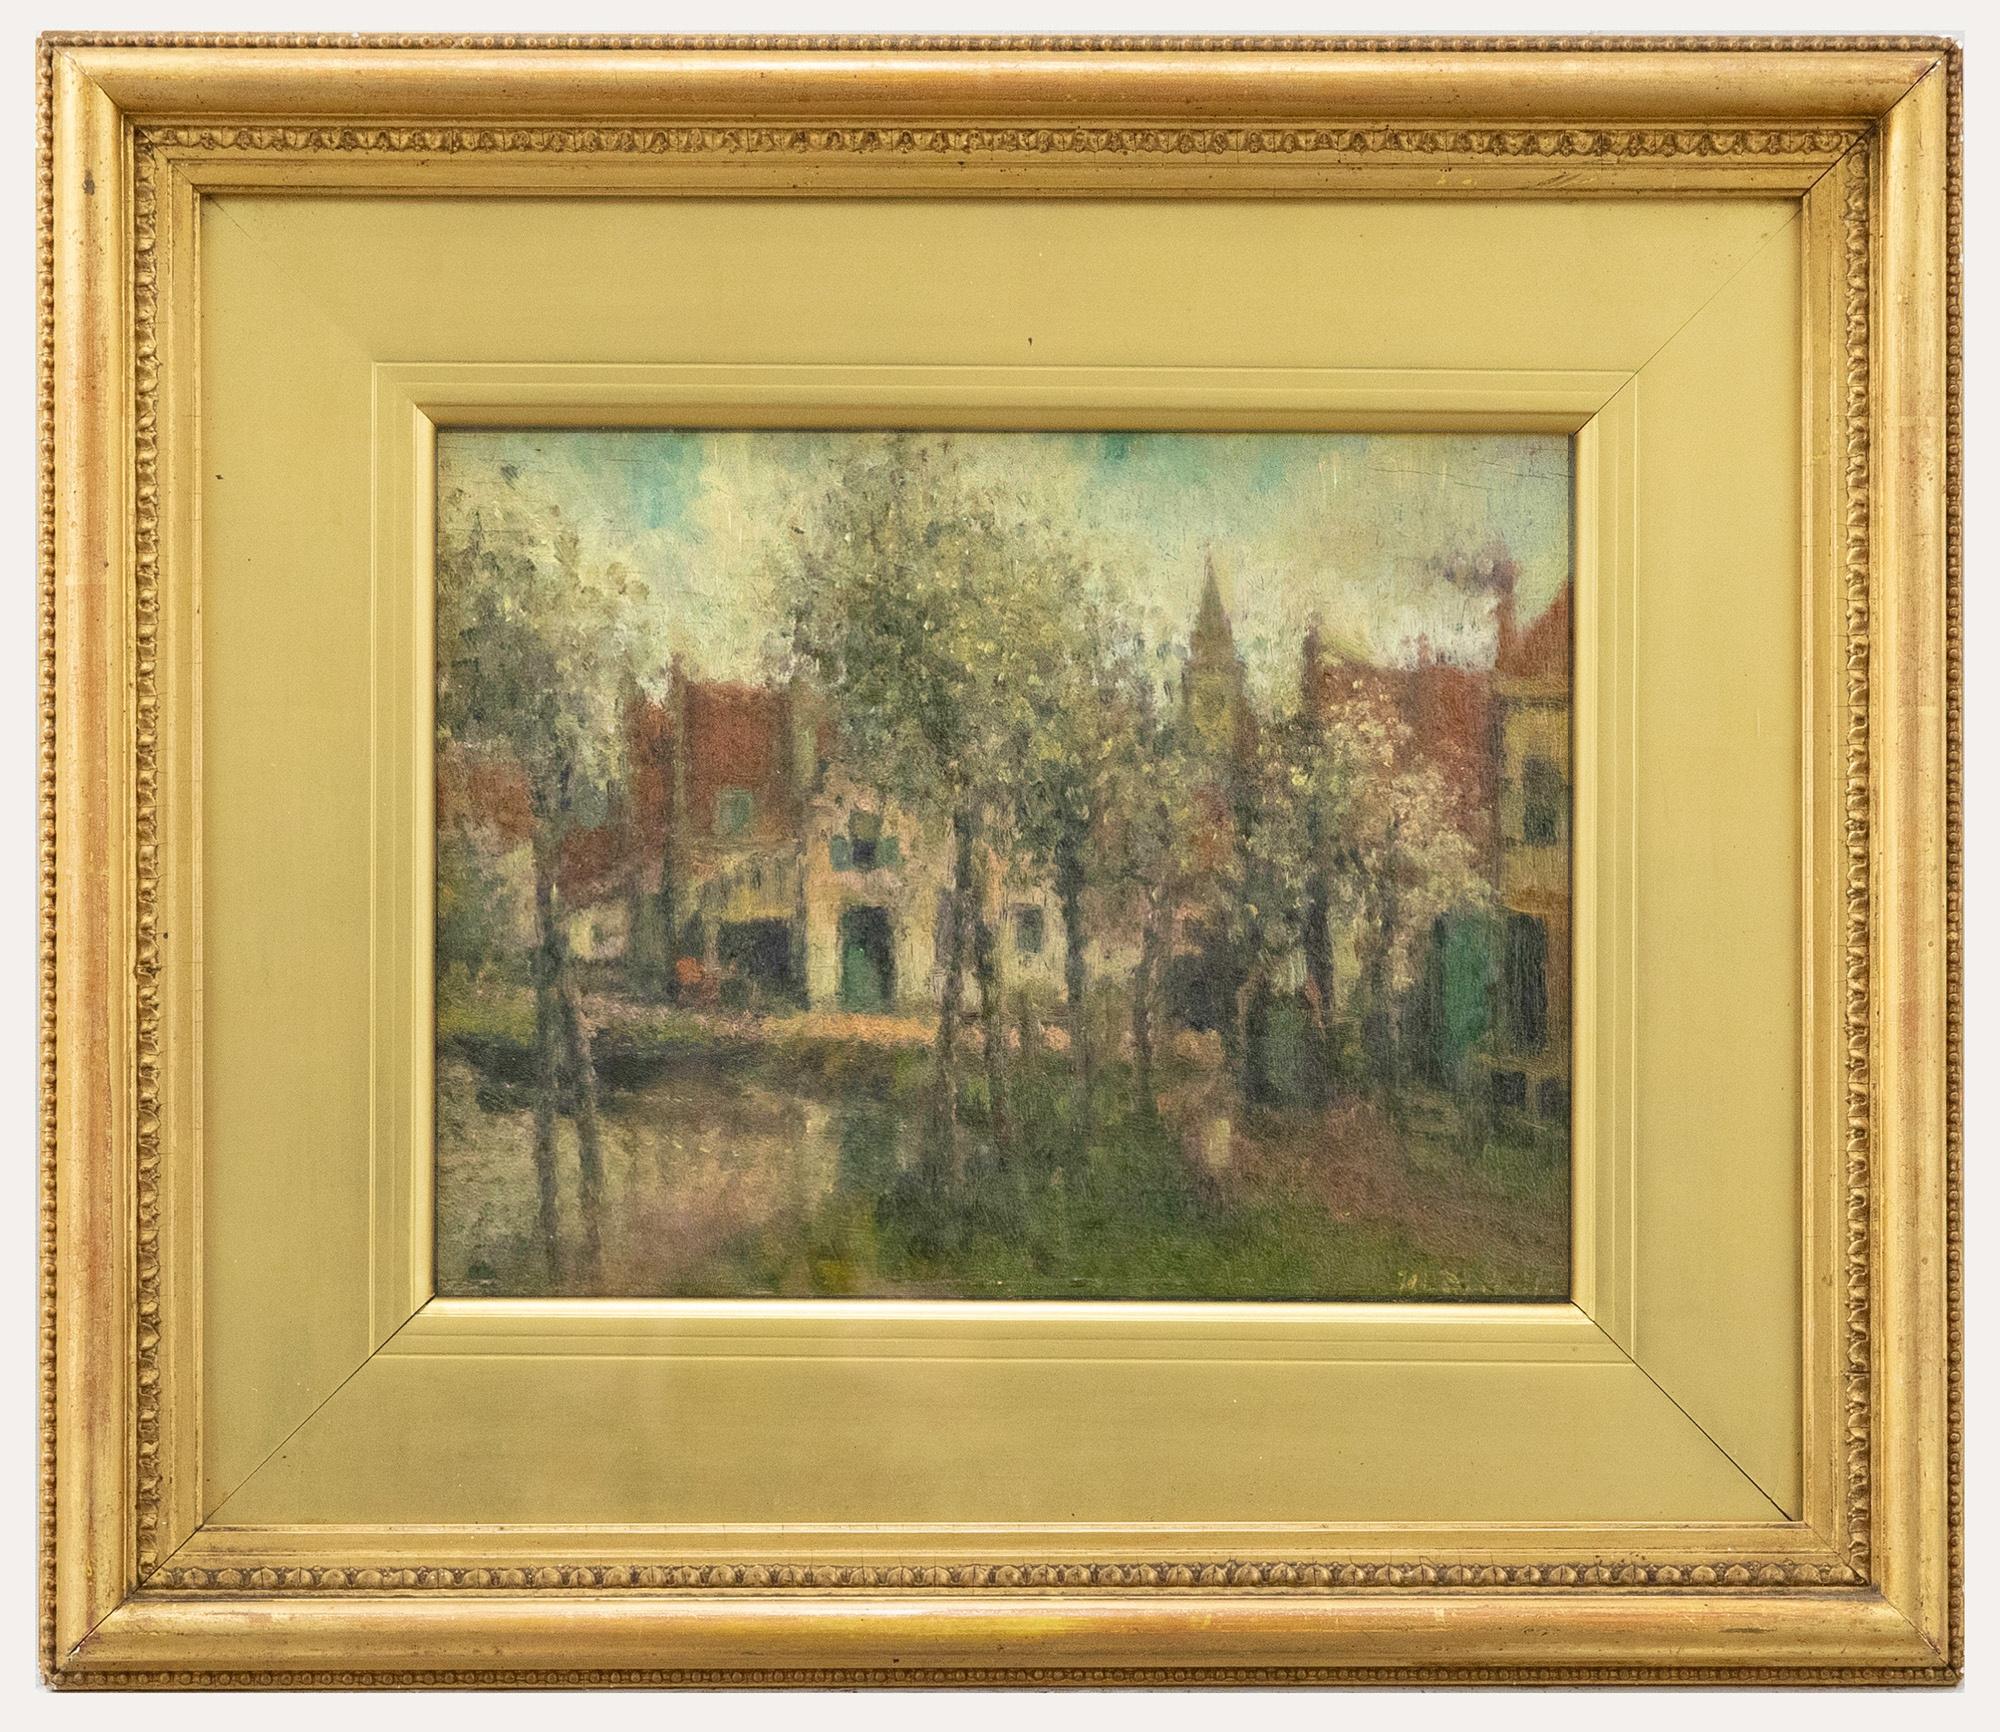 A charming oil scene depicting a dutch village and farm buildings. Painted in an impressionist style using soft brushwork to capture the sleepy village scene. Signed to the lower right. Presented in a gilt frame and slip. Title to label verso. On